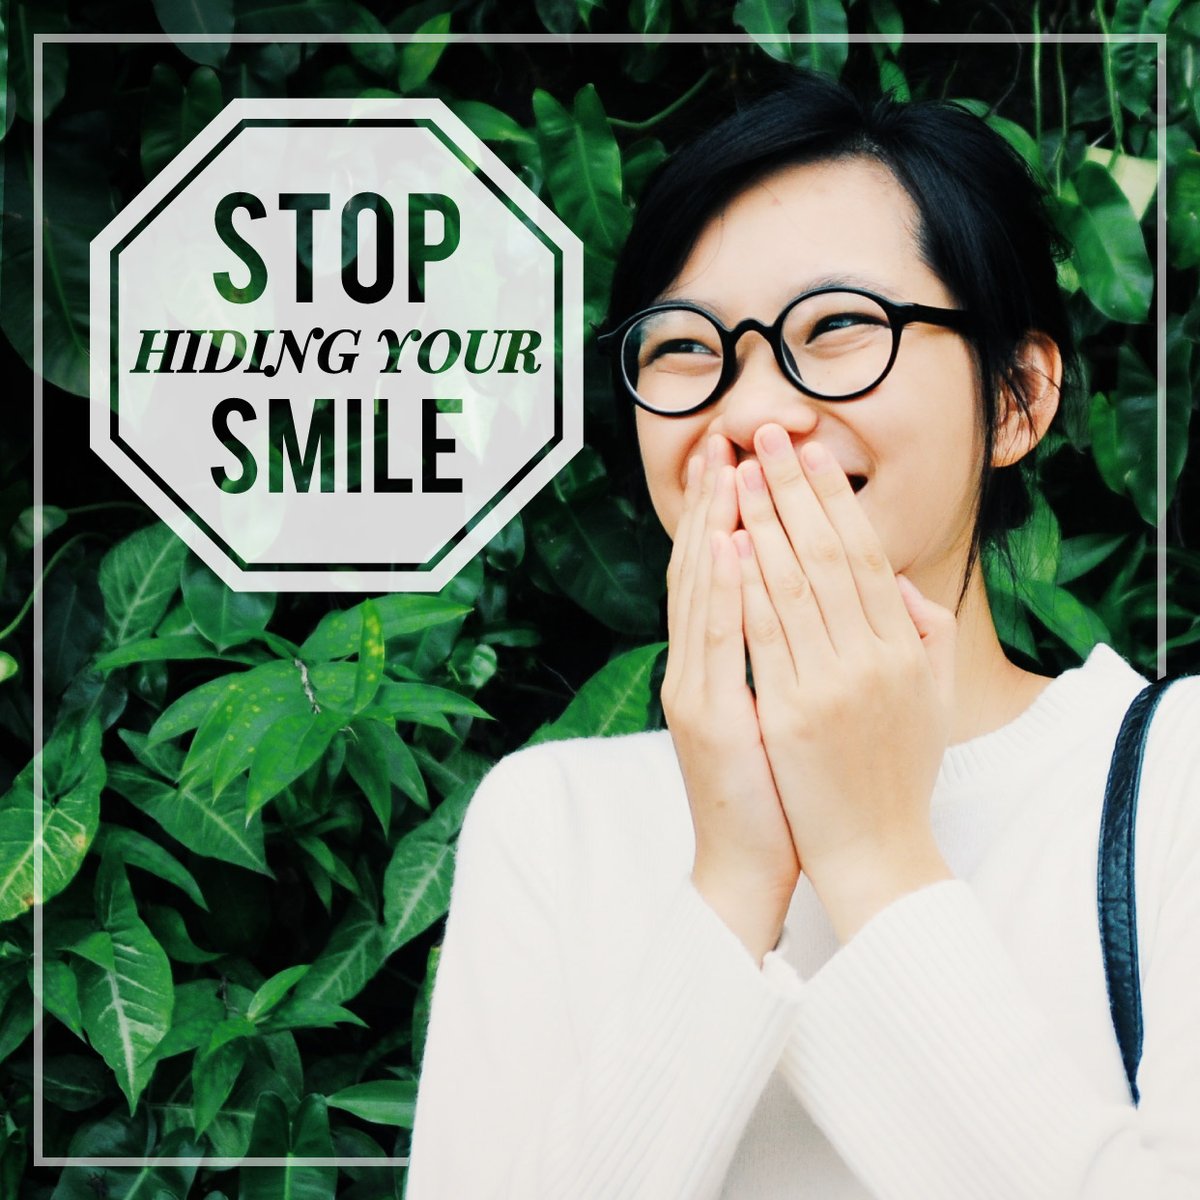 Self-conscious about your smile? Come see us, and we can help you get a smile you’ll be eager to show off to the world! 801-774-0770

#orthodontist #freeconsultations